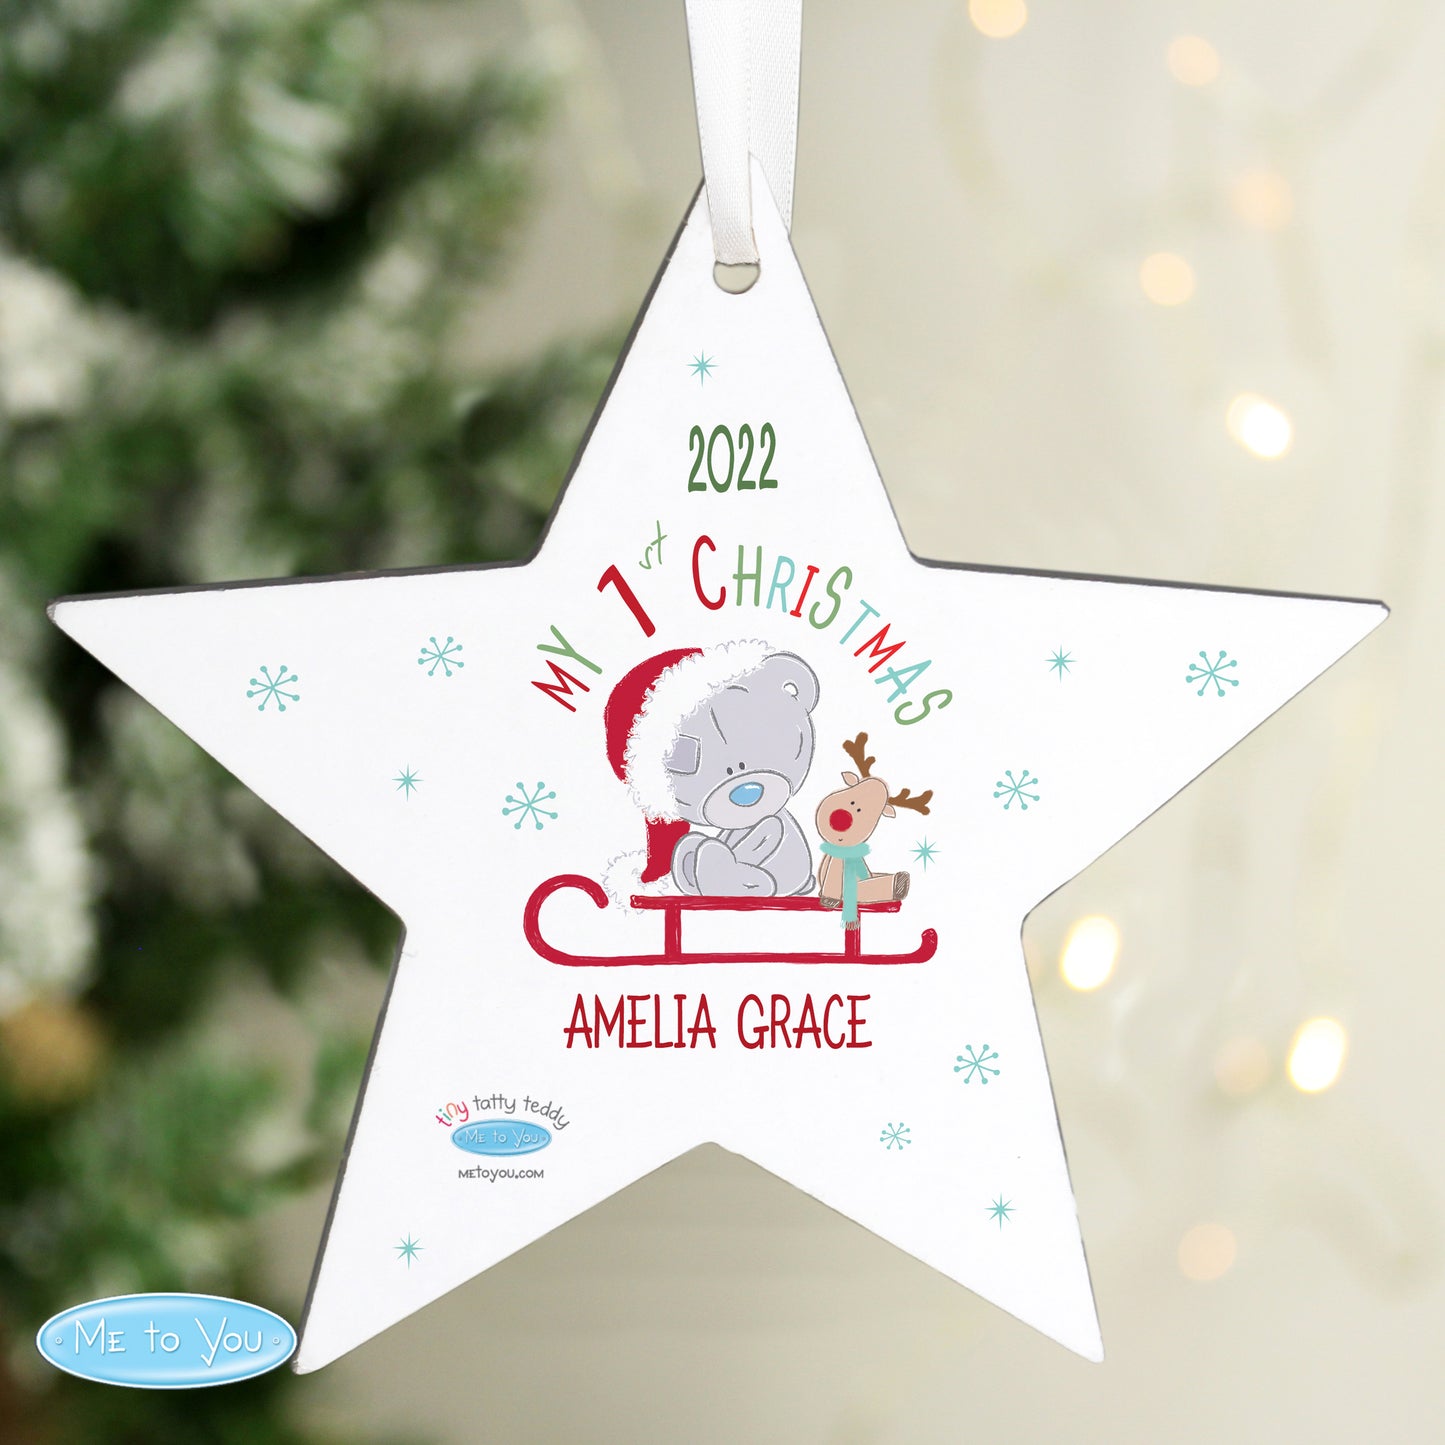 Personalised Tiny Tatty Teddy My 1st Christmas Sleigh Wooden Star Decoration - Personalise It!